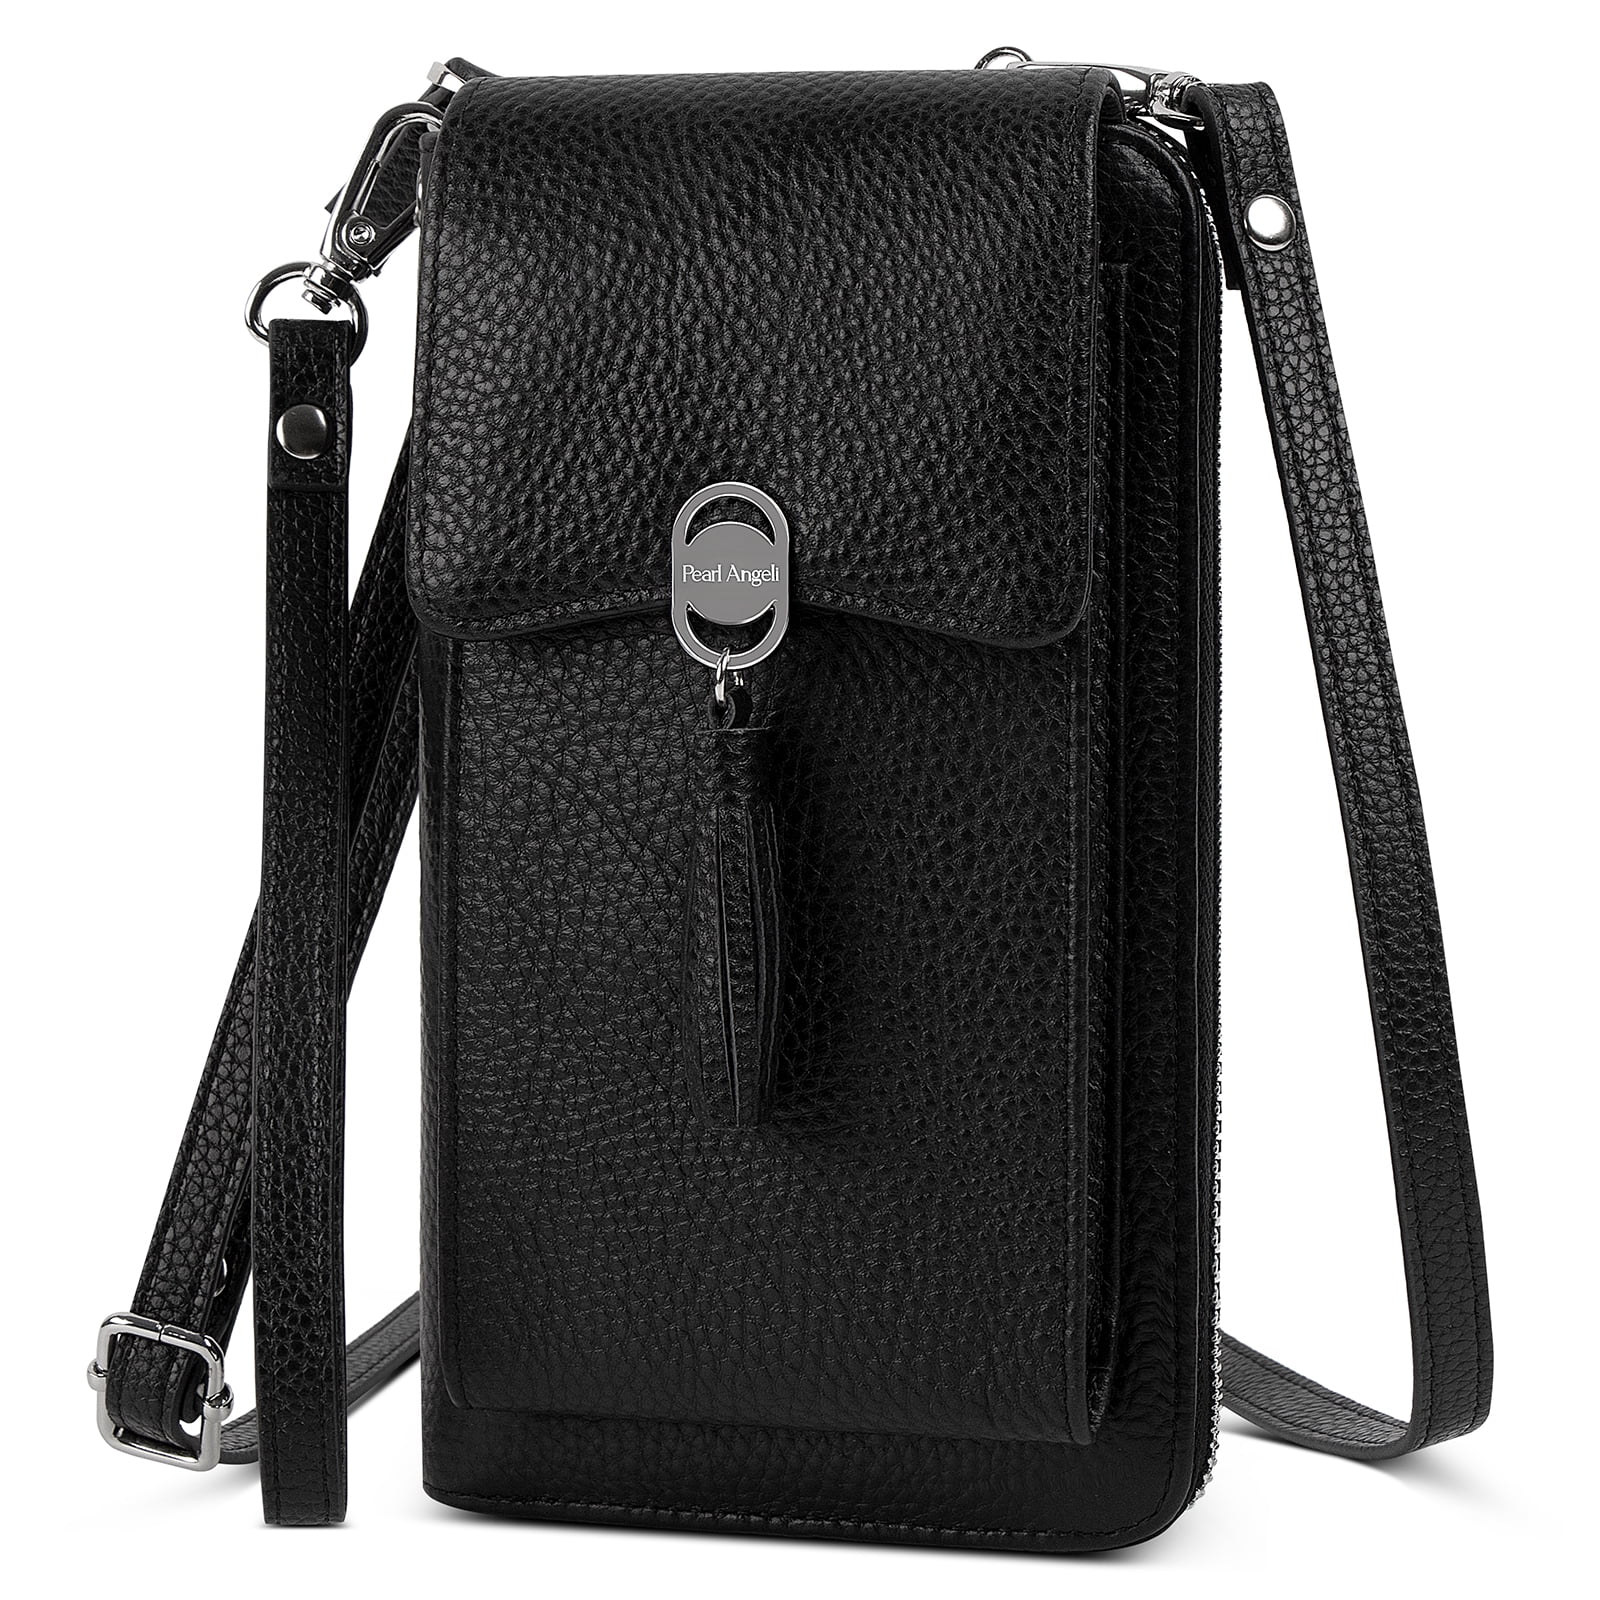 Pearl Angeli Women's Leather Mobile Phone Crossbody Cell Phone Bag RFID ...